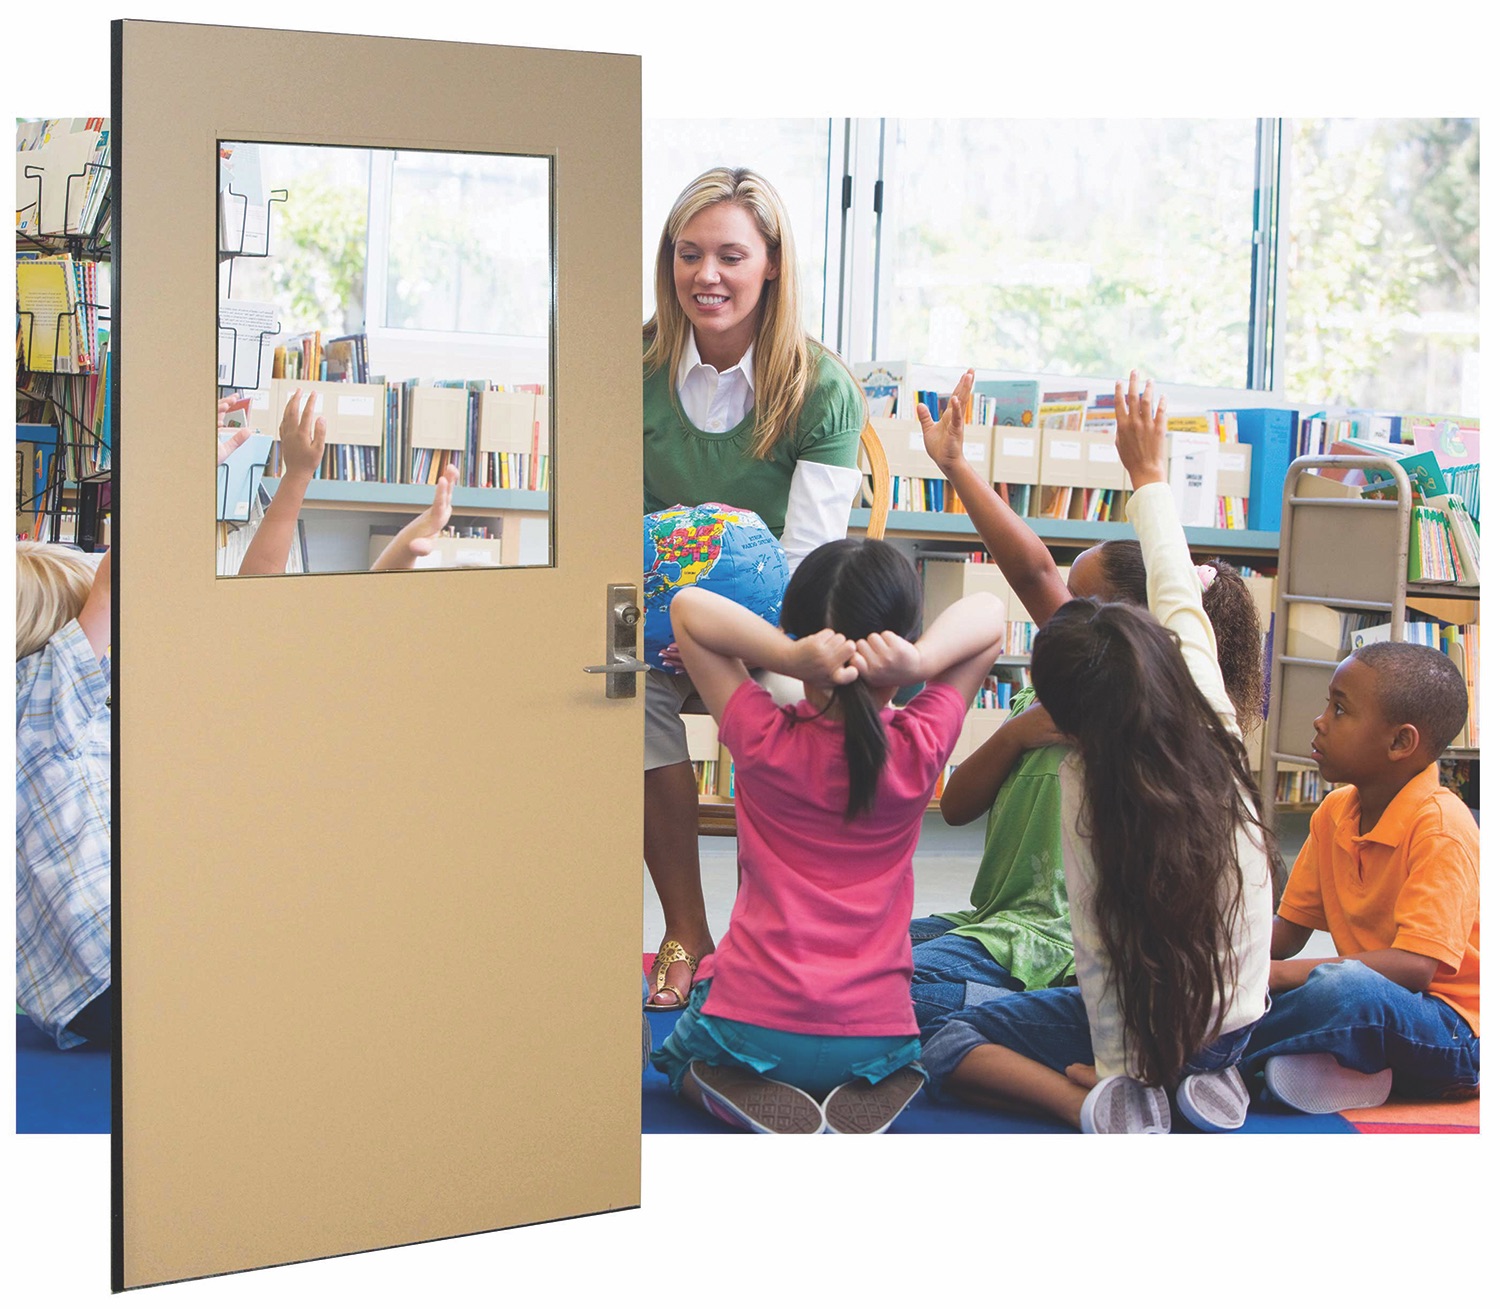 Ceco attack-resistant openings in a classroom setting